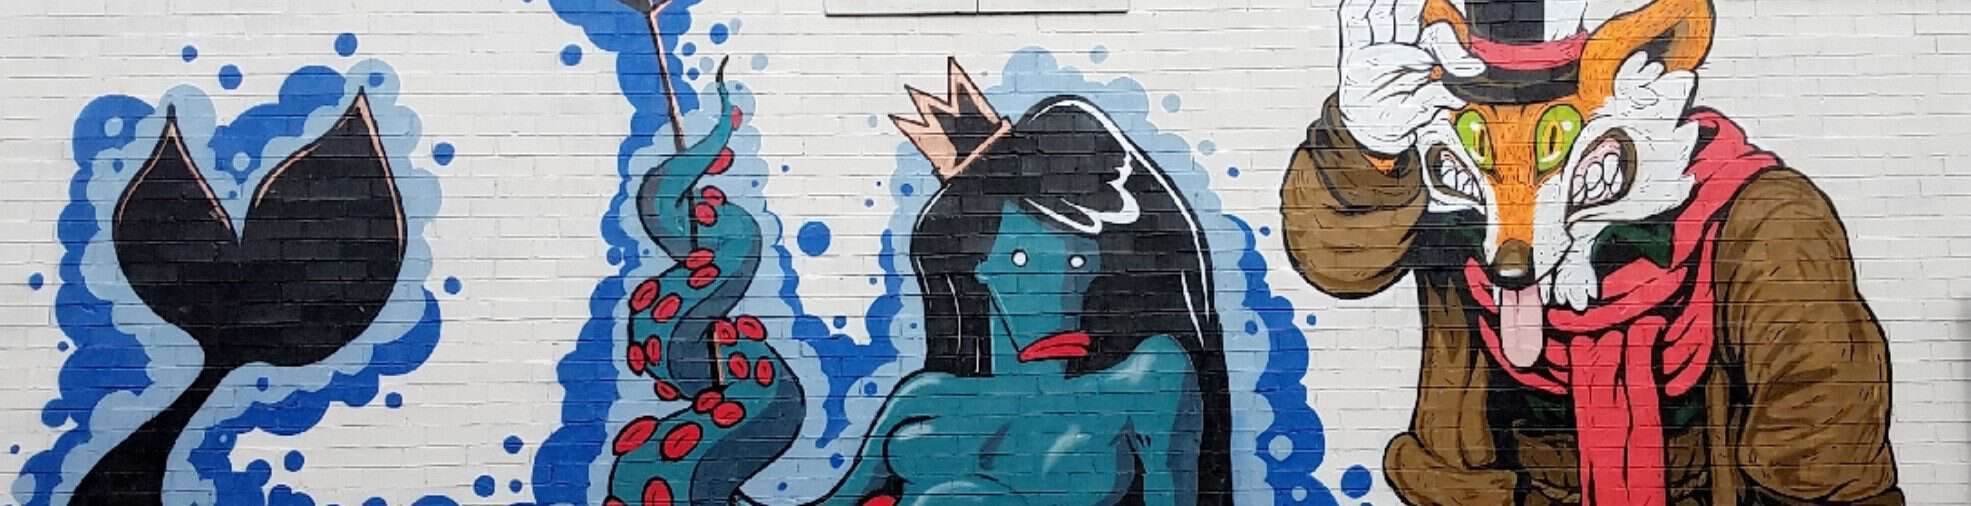 Mural by Courtney Hicks and Pitoto featuring a fox and a mermaid